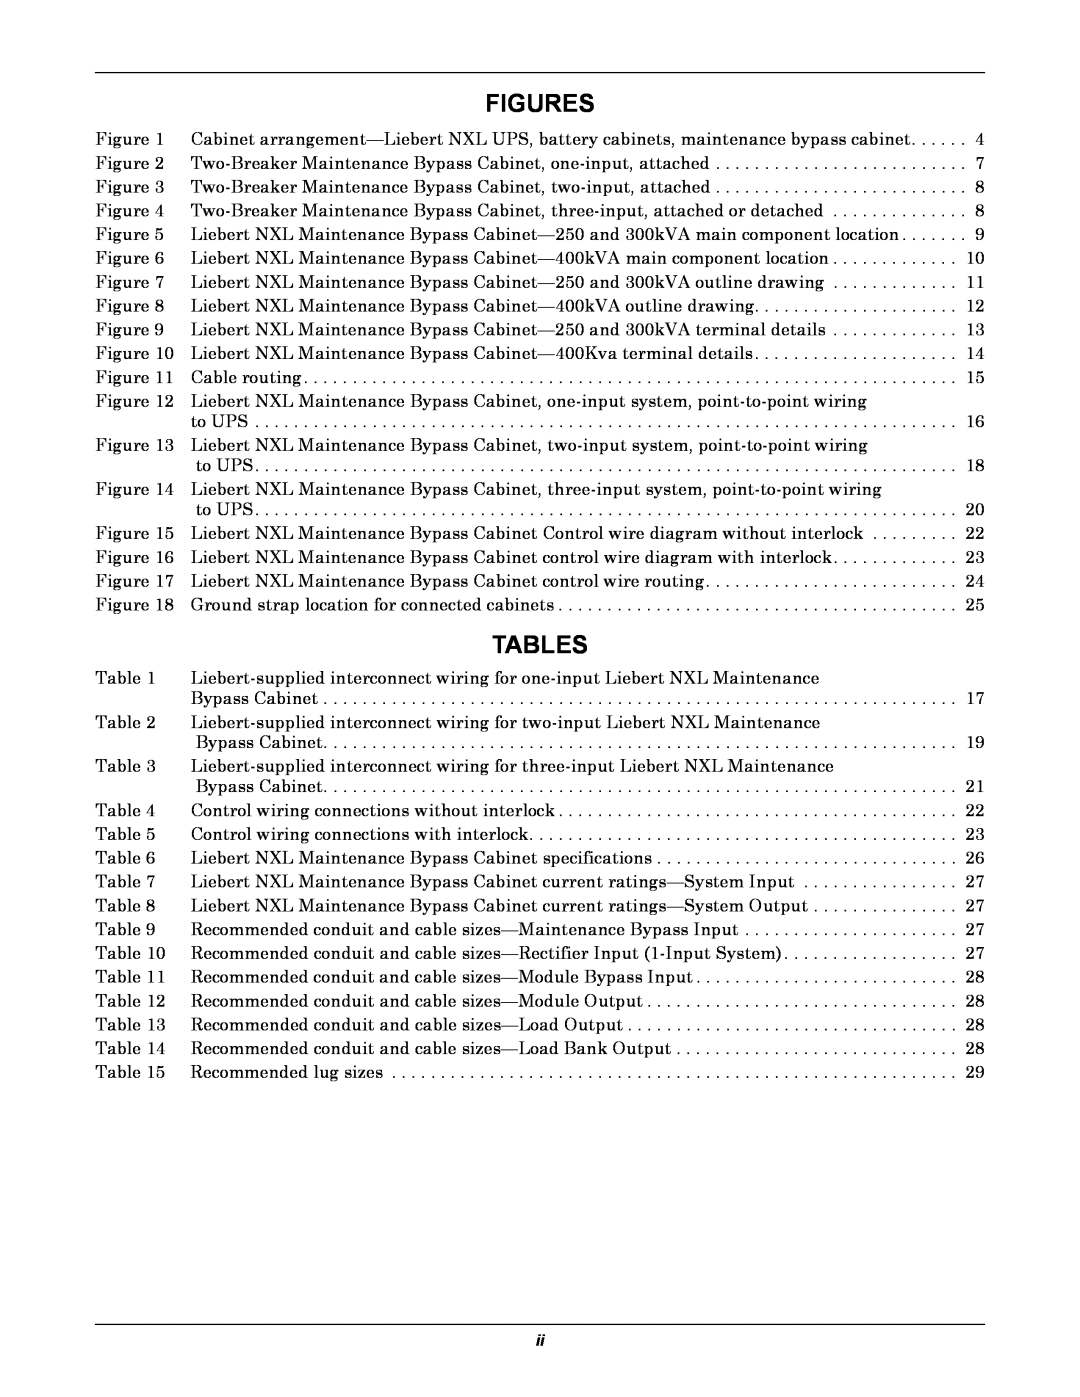 Emerson UPS Systems installation manual Figures, Tables 